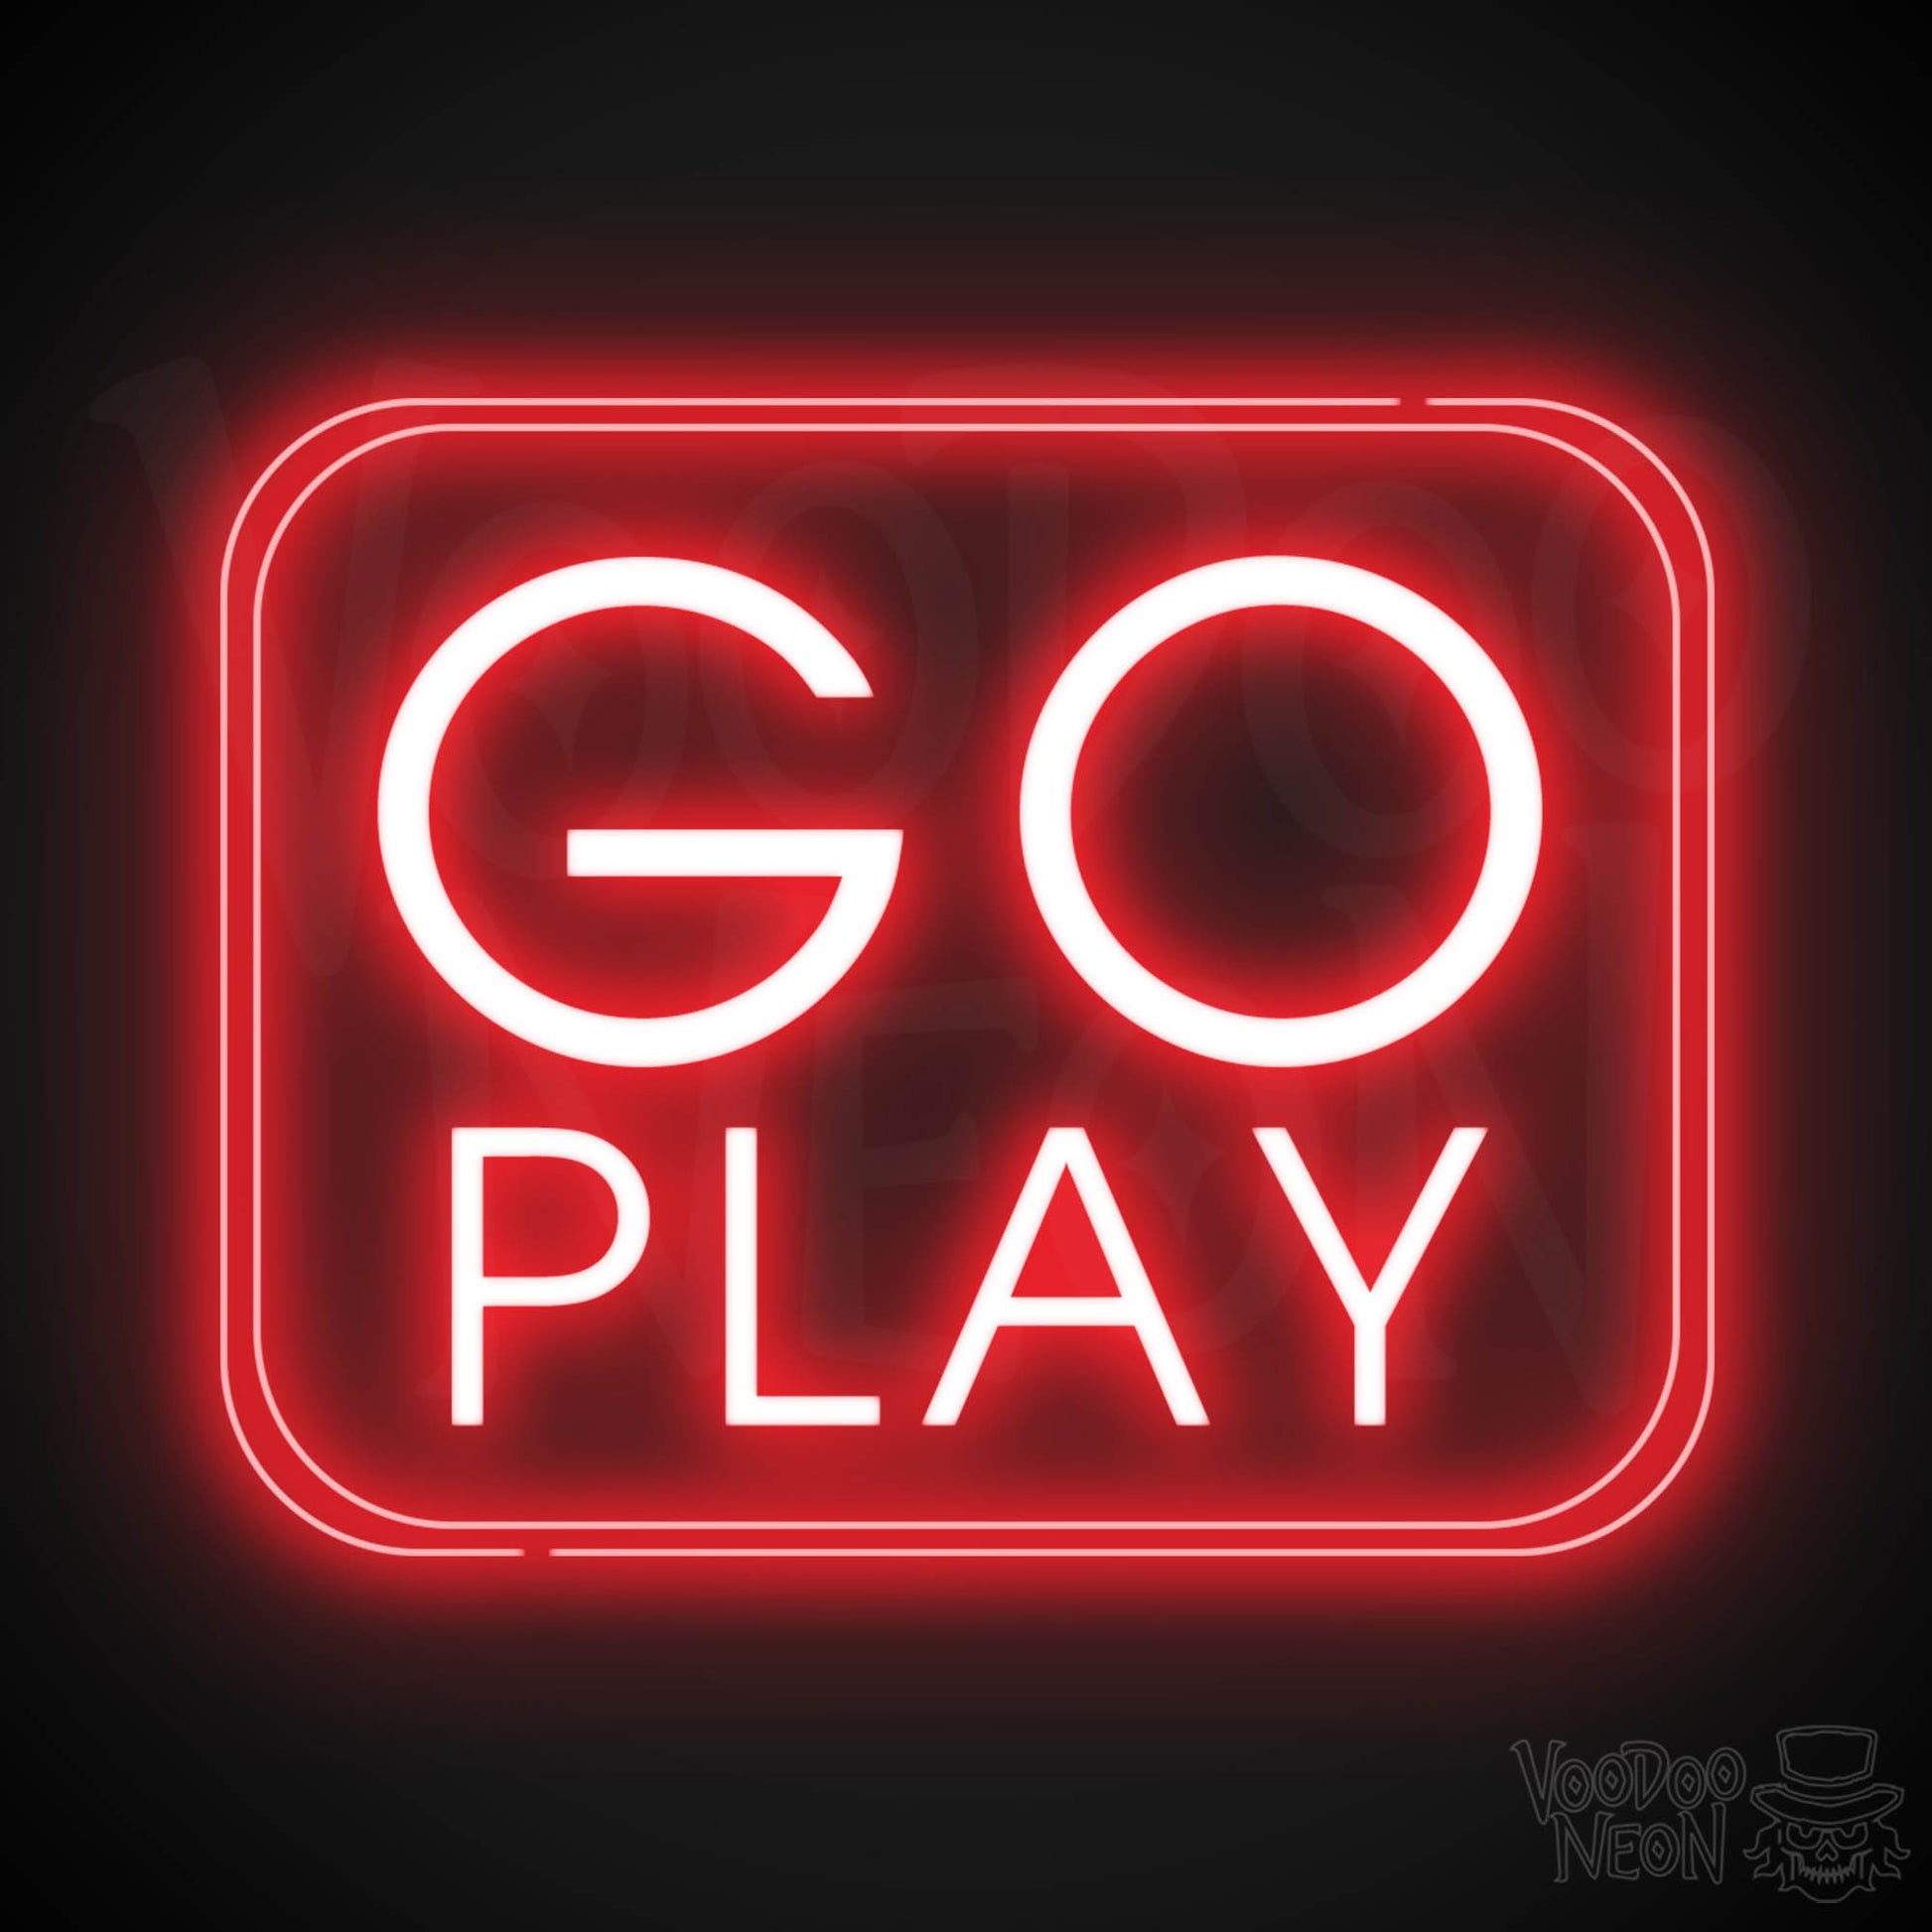 Go Play Neon Sign - Neon Go Play Sign - LED Wall Art - Color Red